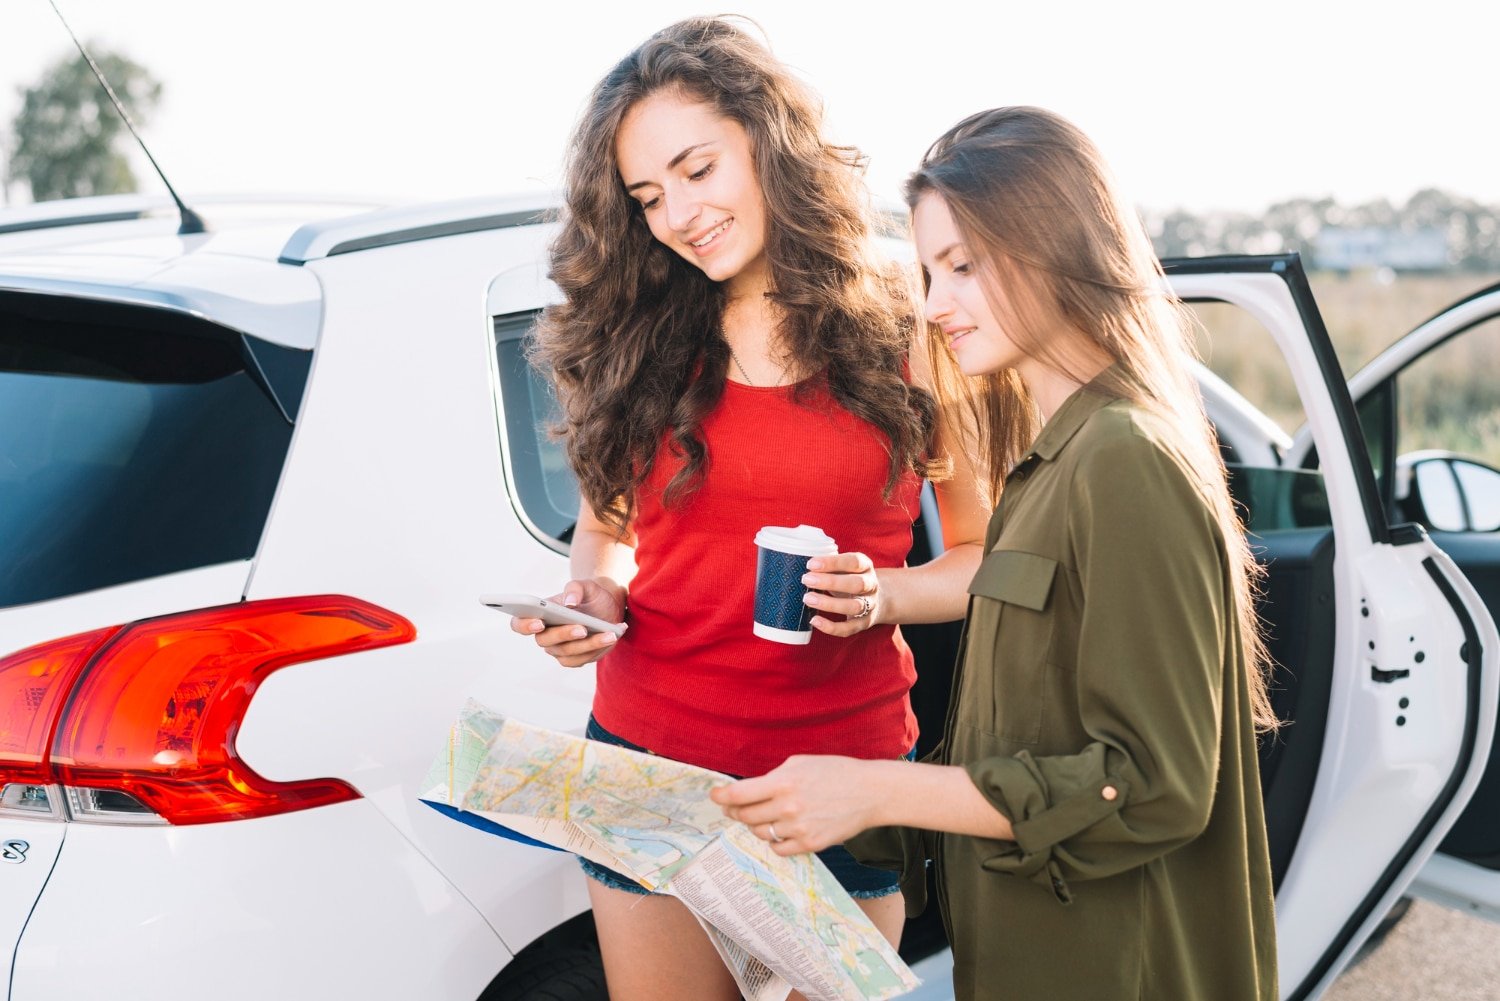 Rent Cars Affordably with Zest Car Rental